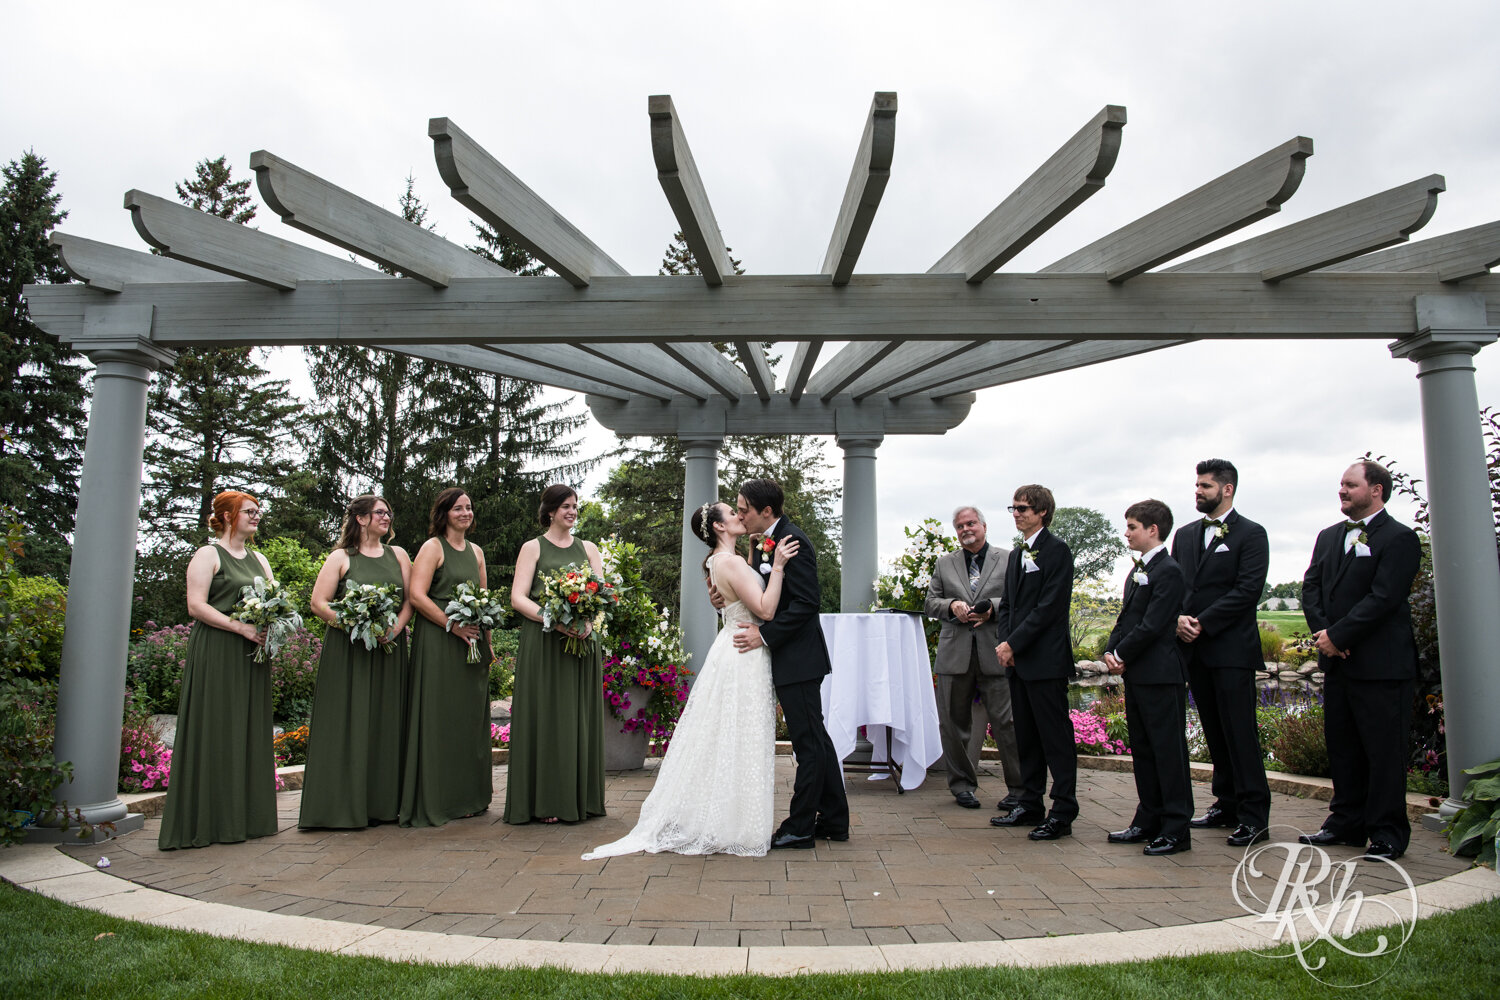 Bride and groom kiss during wedding ceremony at Olympic Hills Golf Club in Eden Prairie, Minnesota.